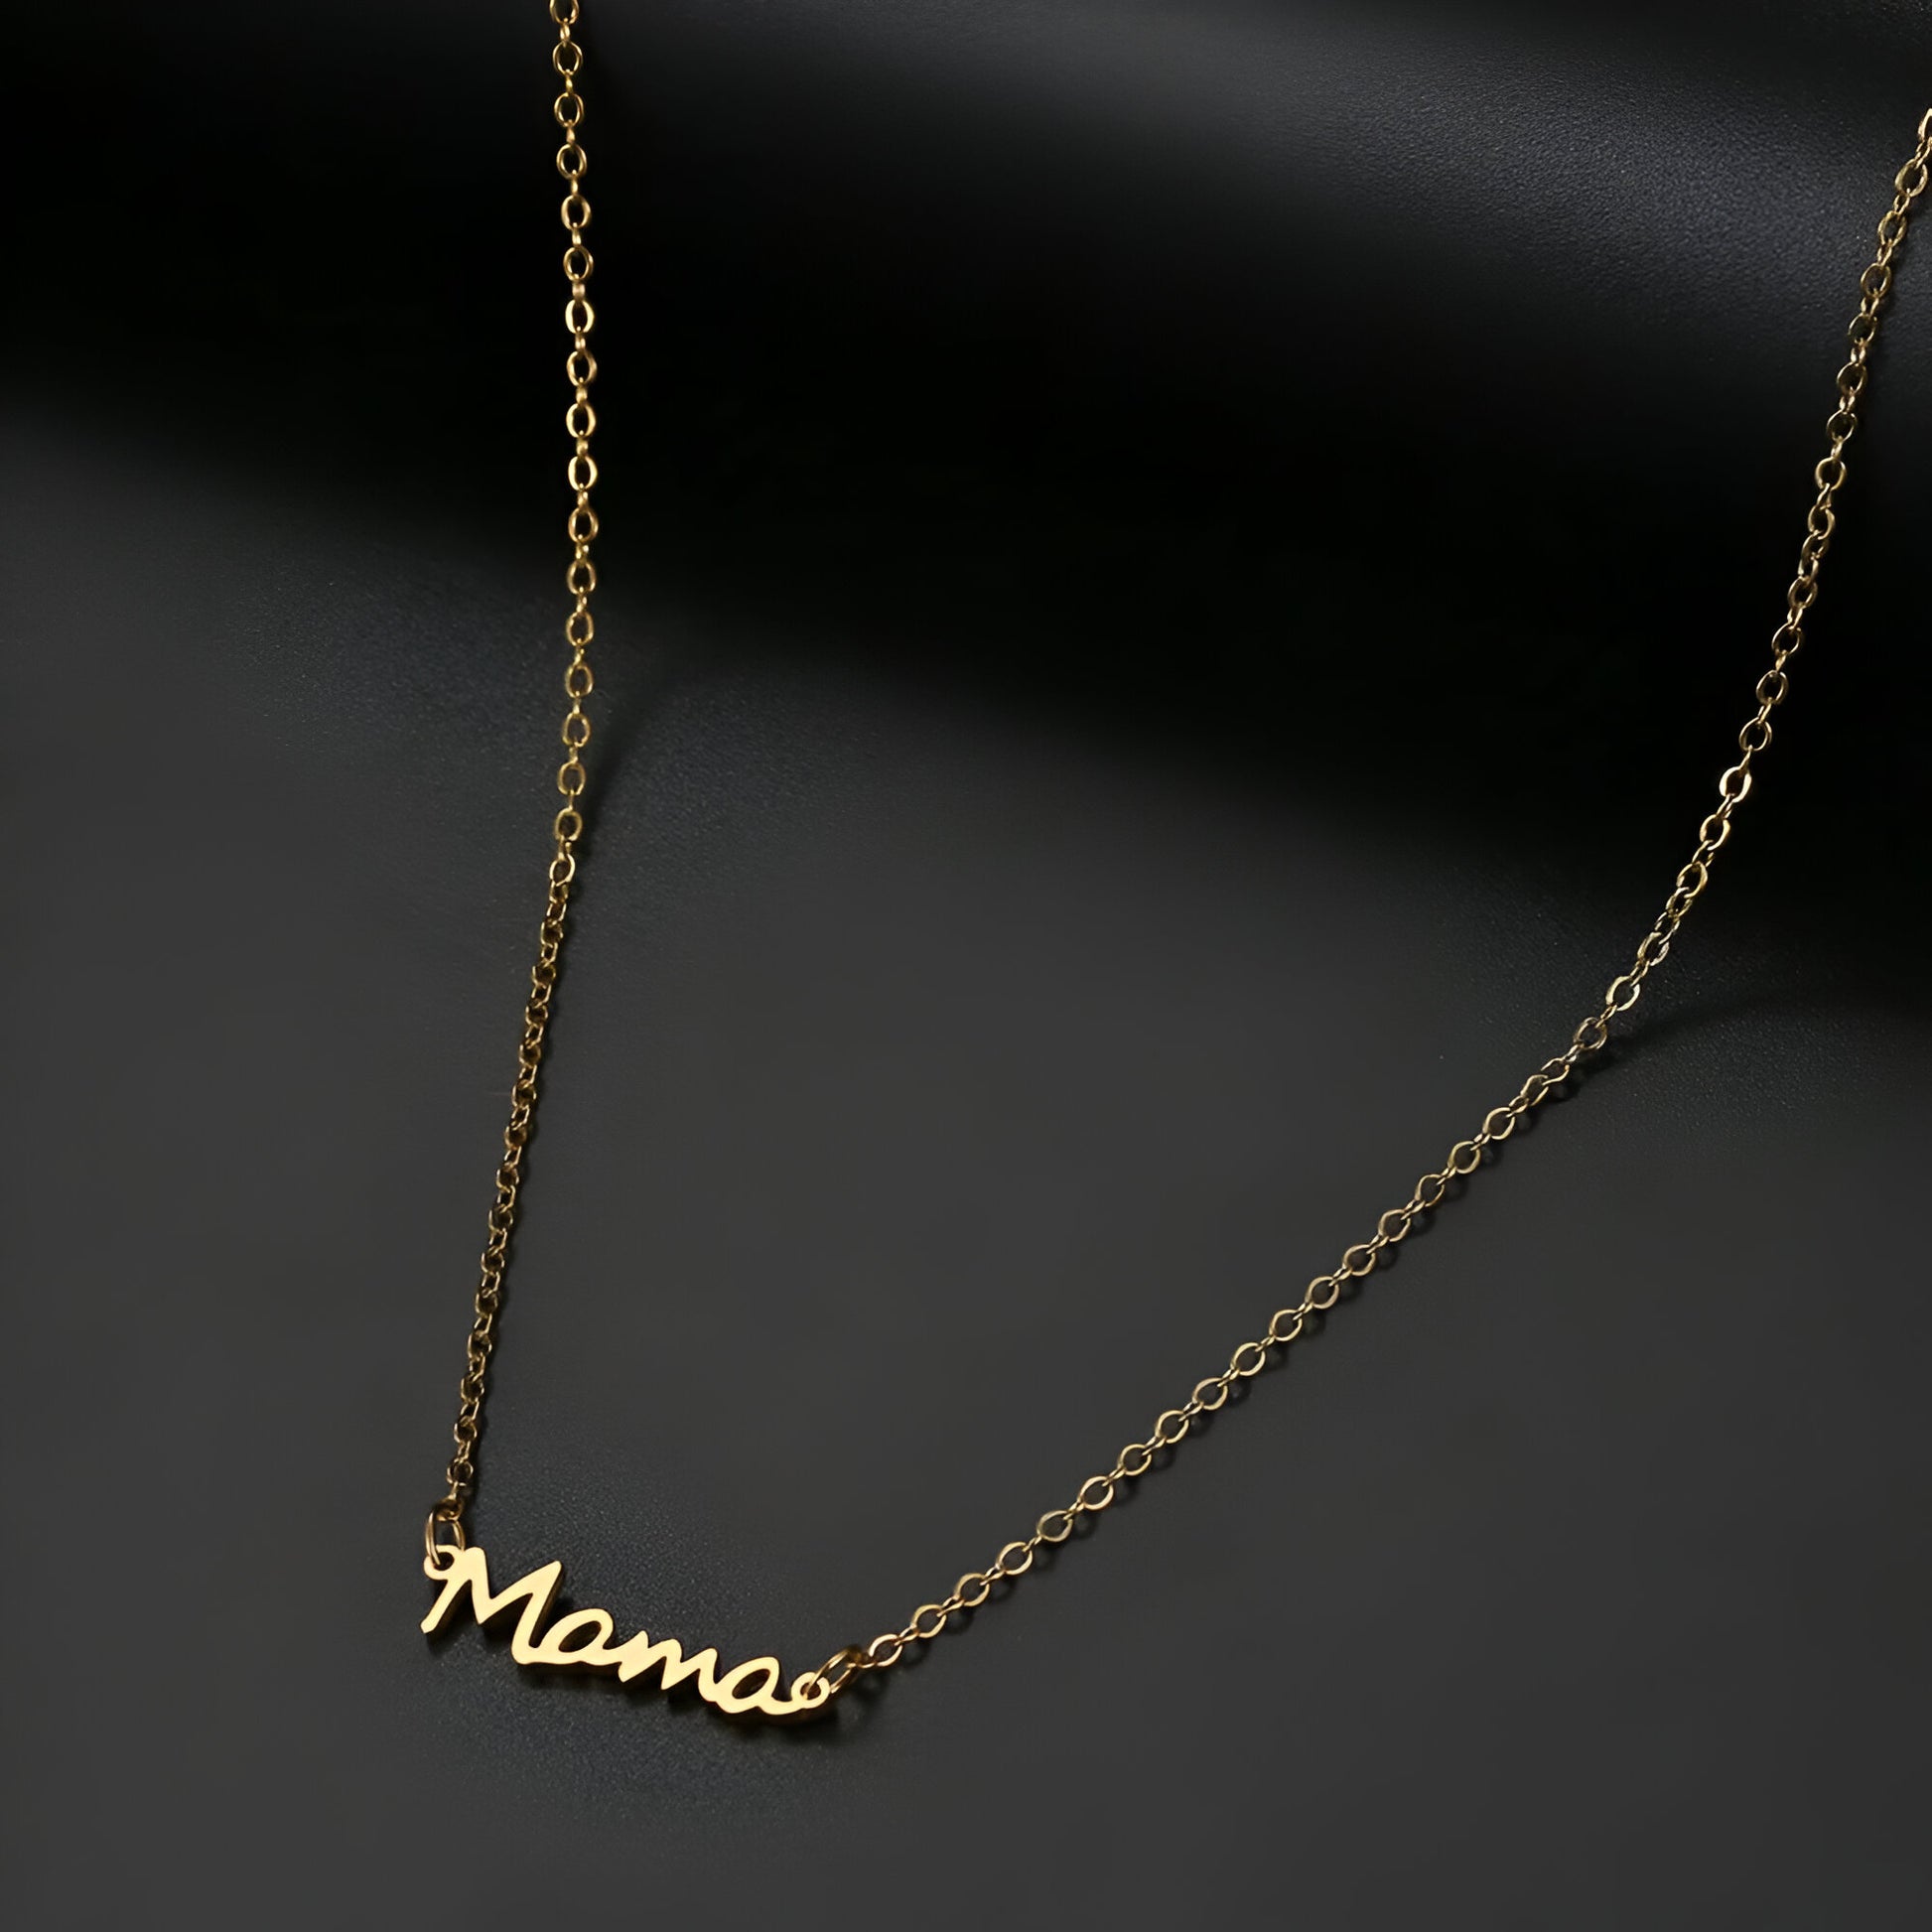 Mom's Eternal Love Mama Necklace